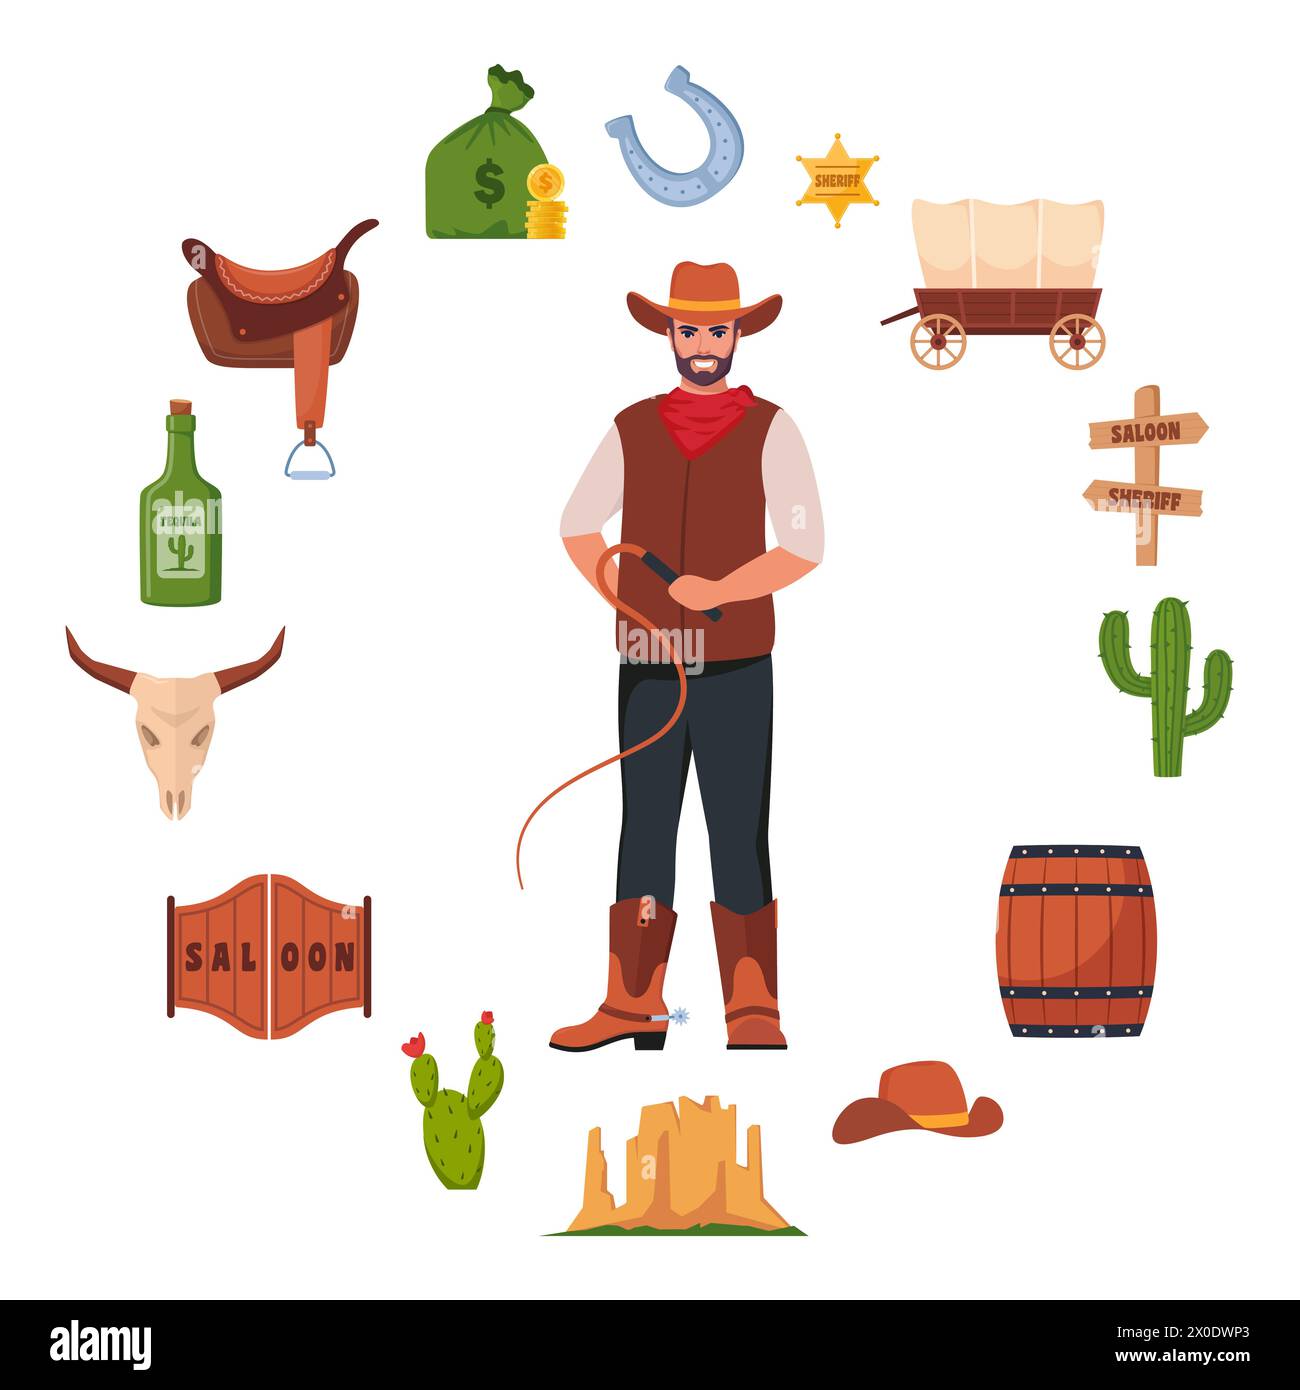 Wild West icons, set. Western and cowboy elements. Signboard, saloon door, wanted poster, sheriff badge, cactus, cow skull, cowboy hat, revolver, wago Stock Vector